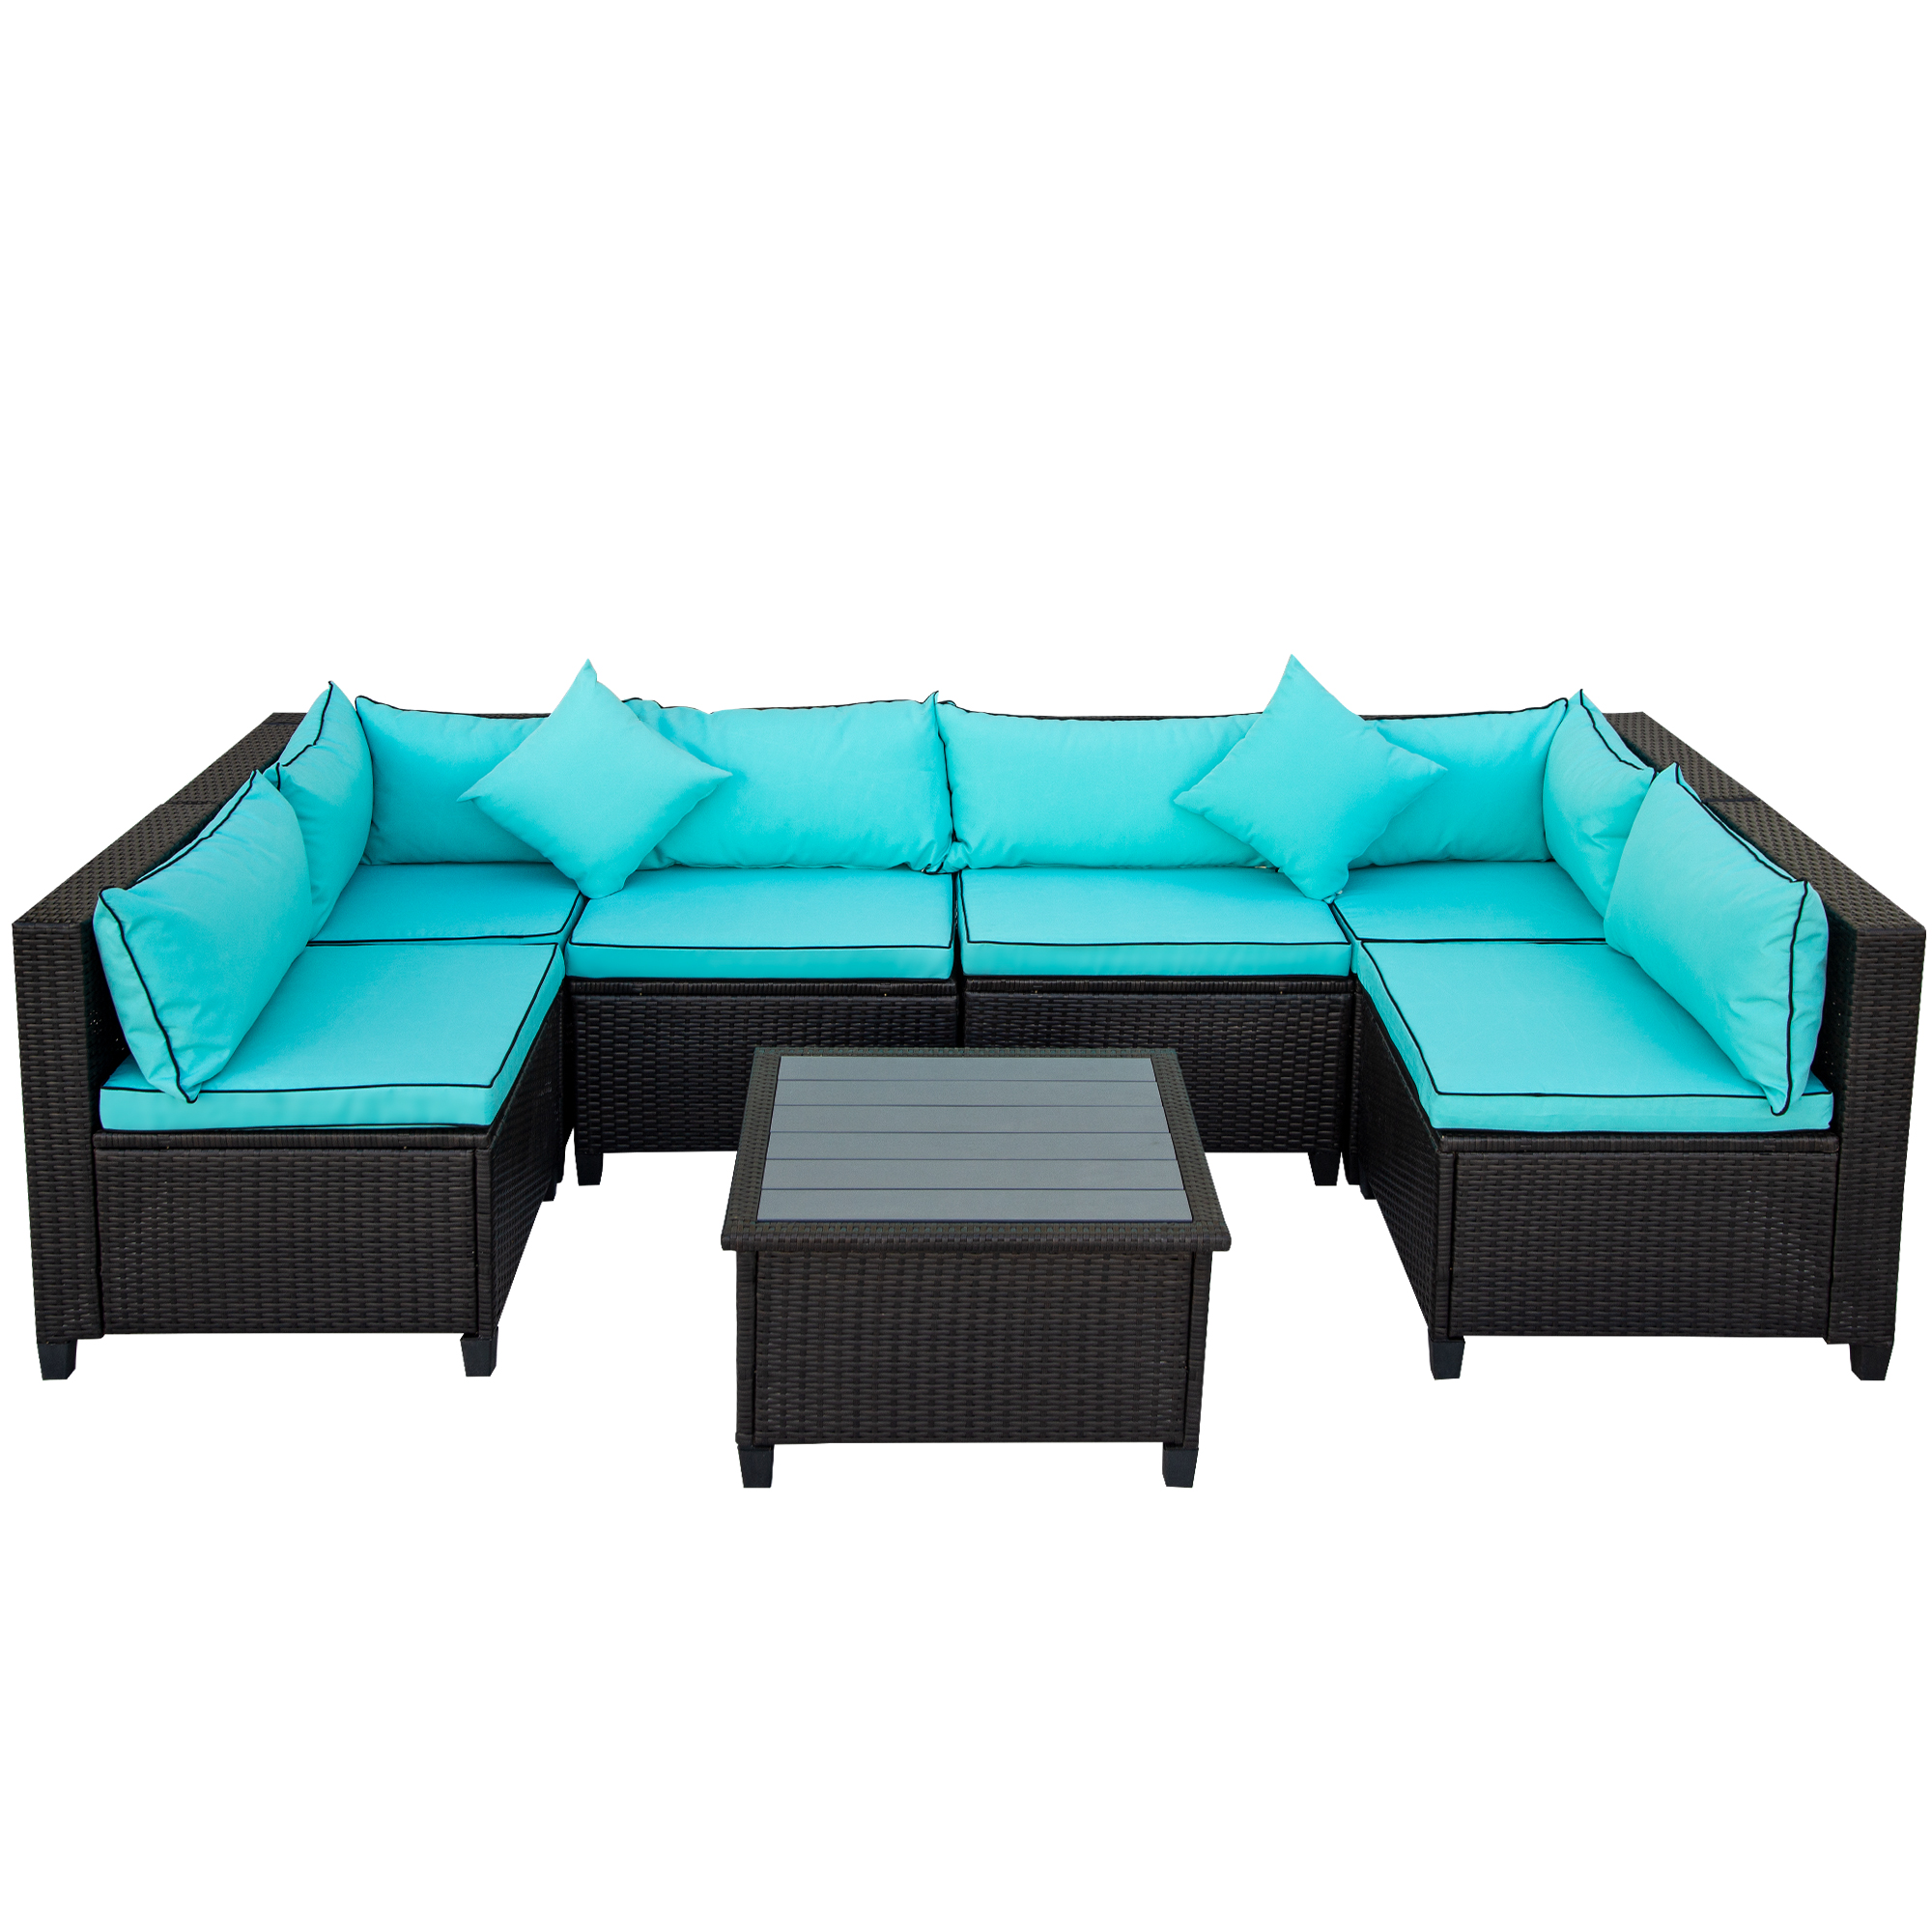 Casainc Quality Rattan Wicker Patio Set, U-Shape Sectional Outdoor Furniture Set with Accent Pillows and Cushions -CASAINC